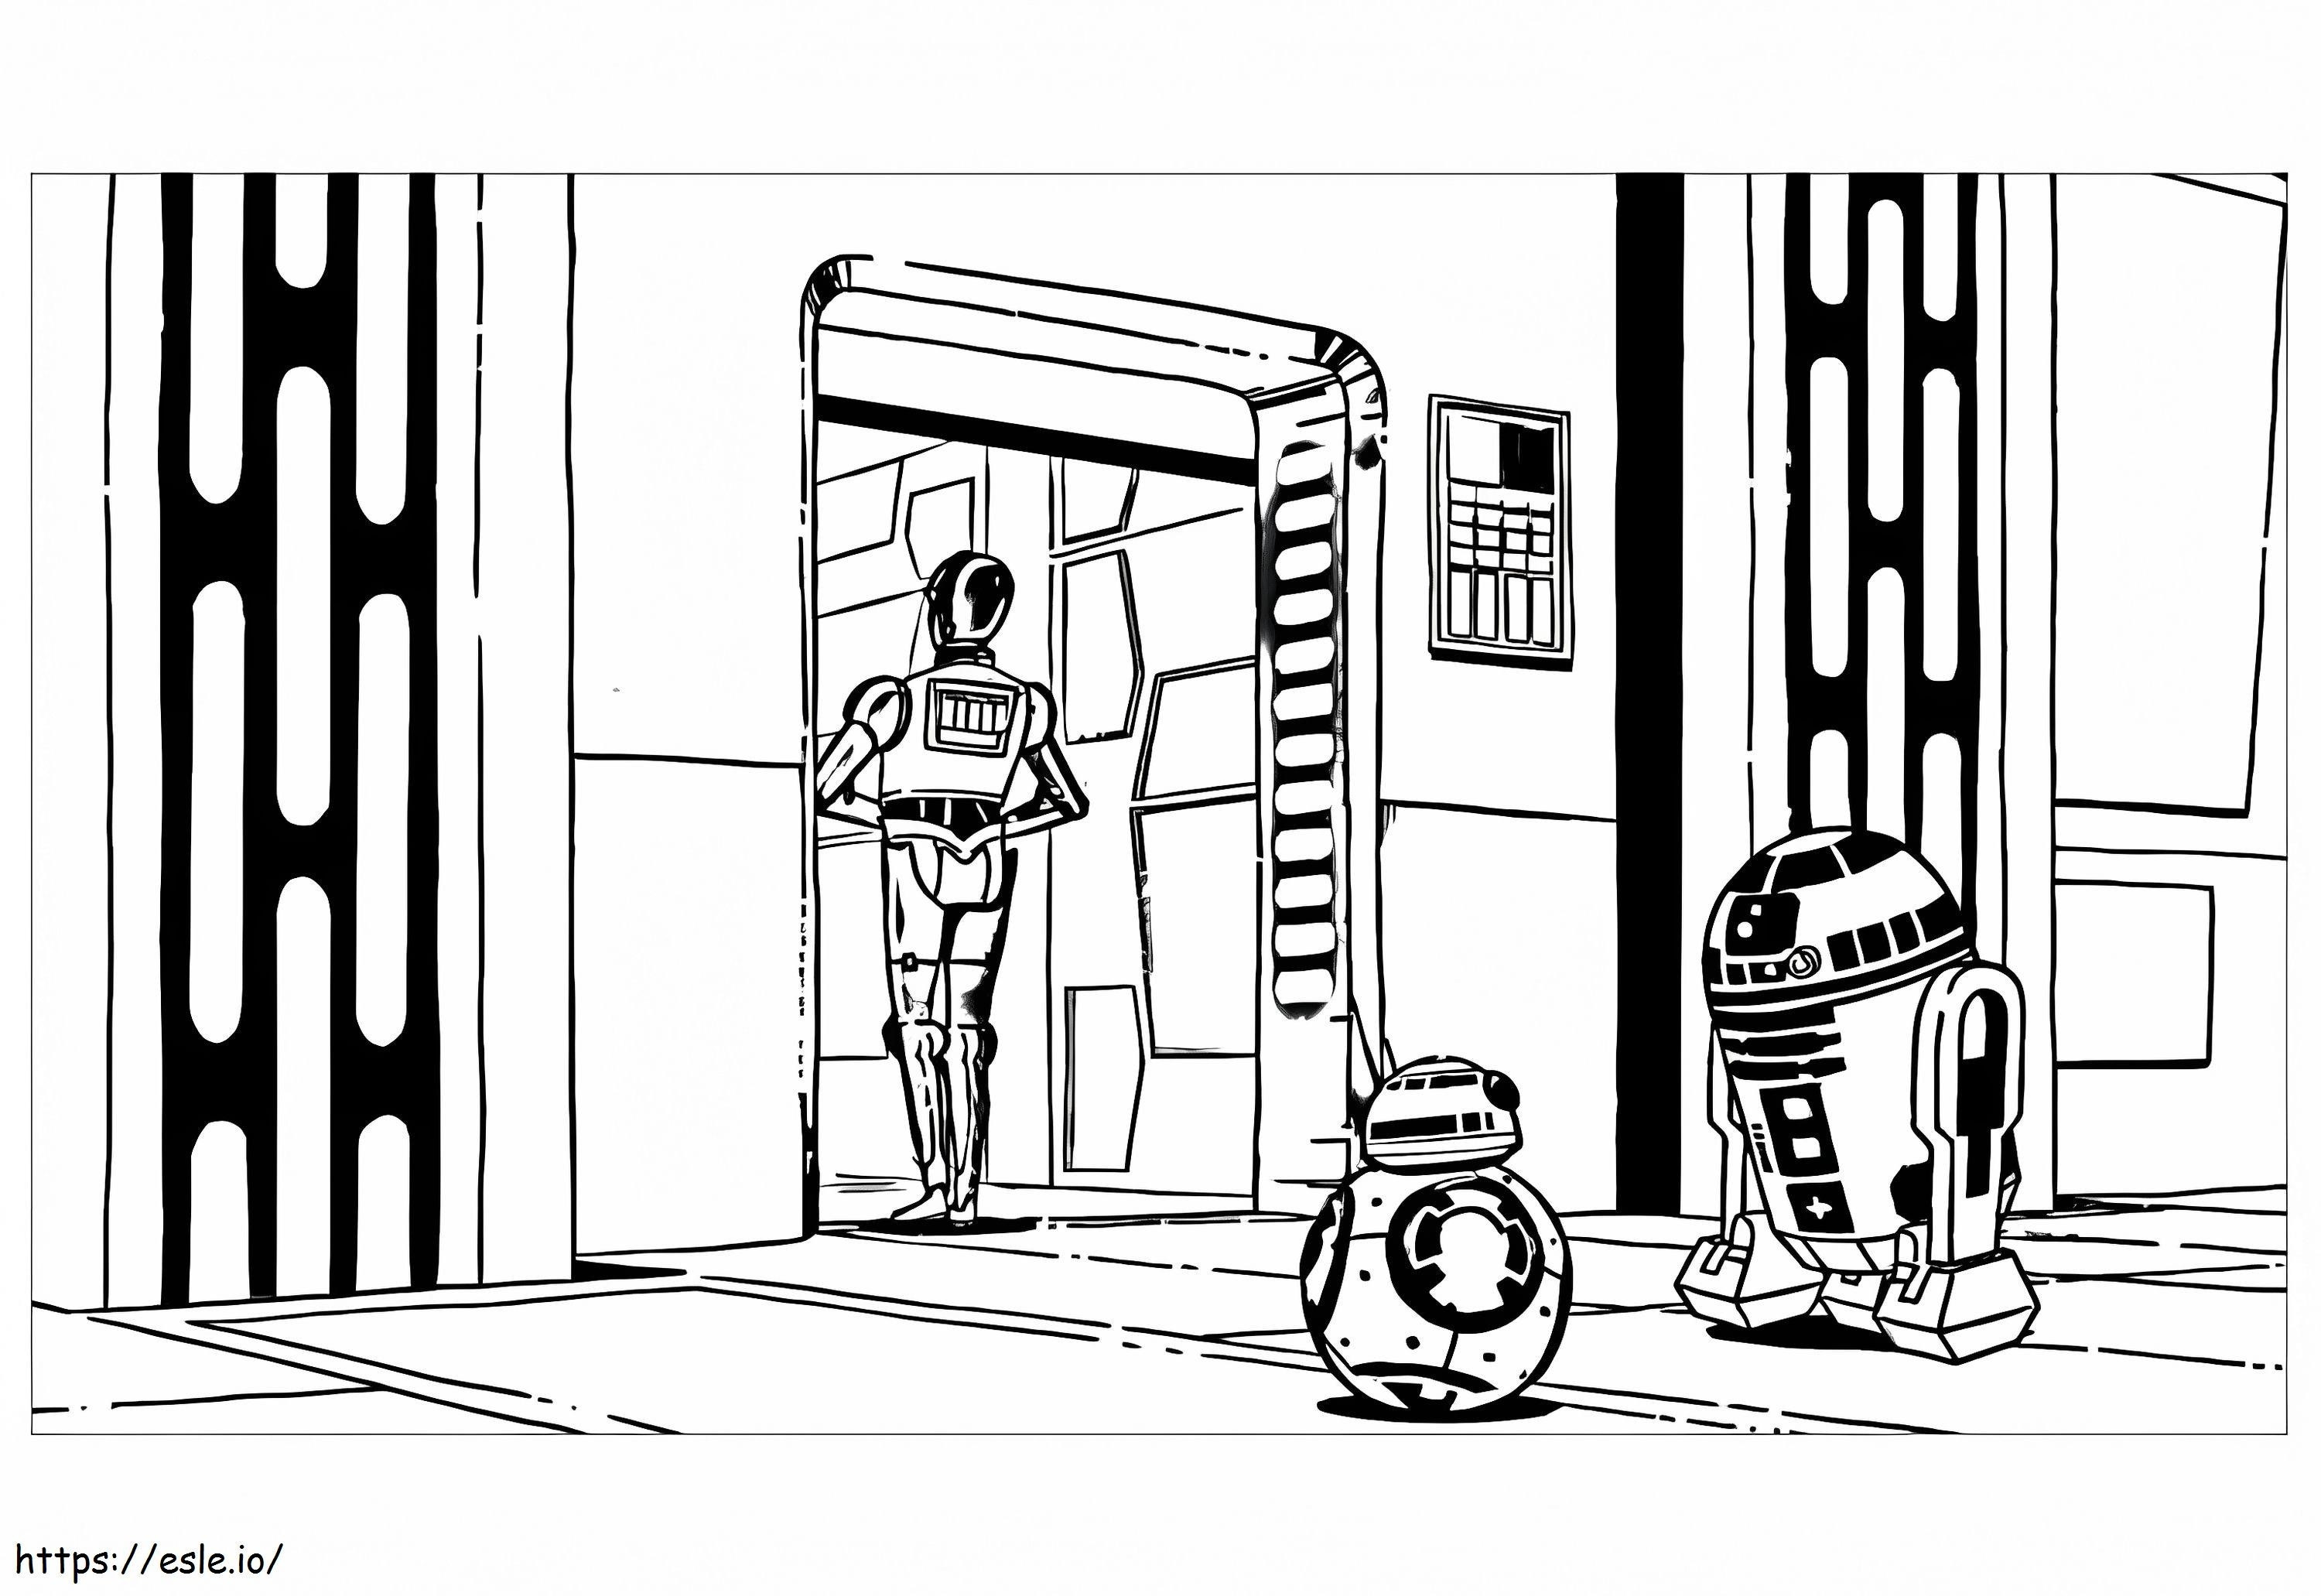 Star Wars Droids coloring page